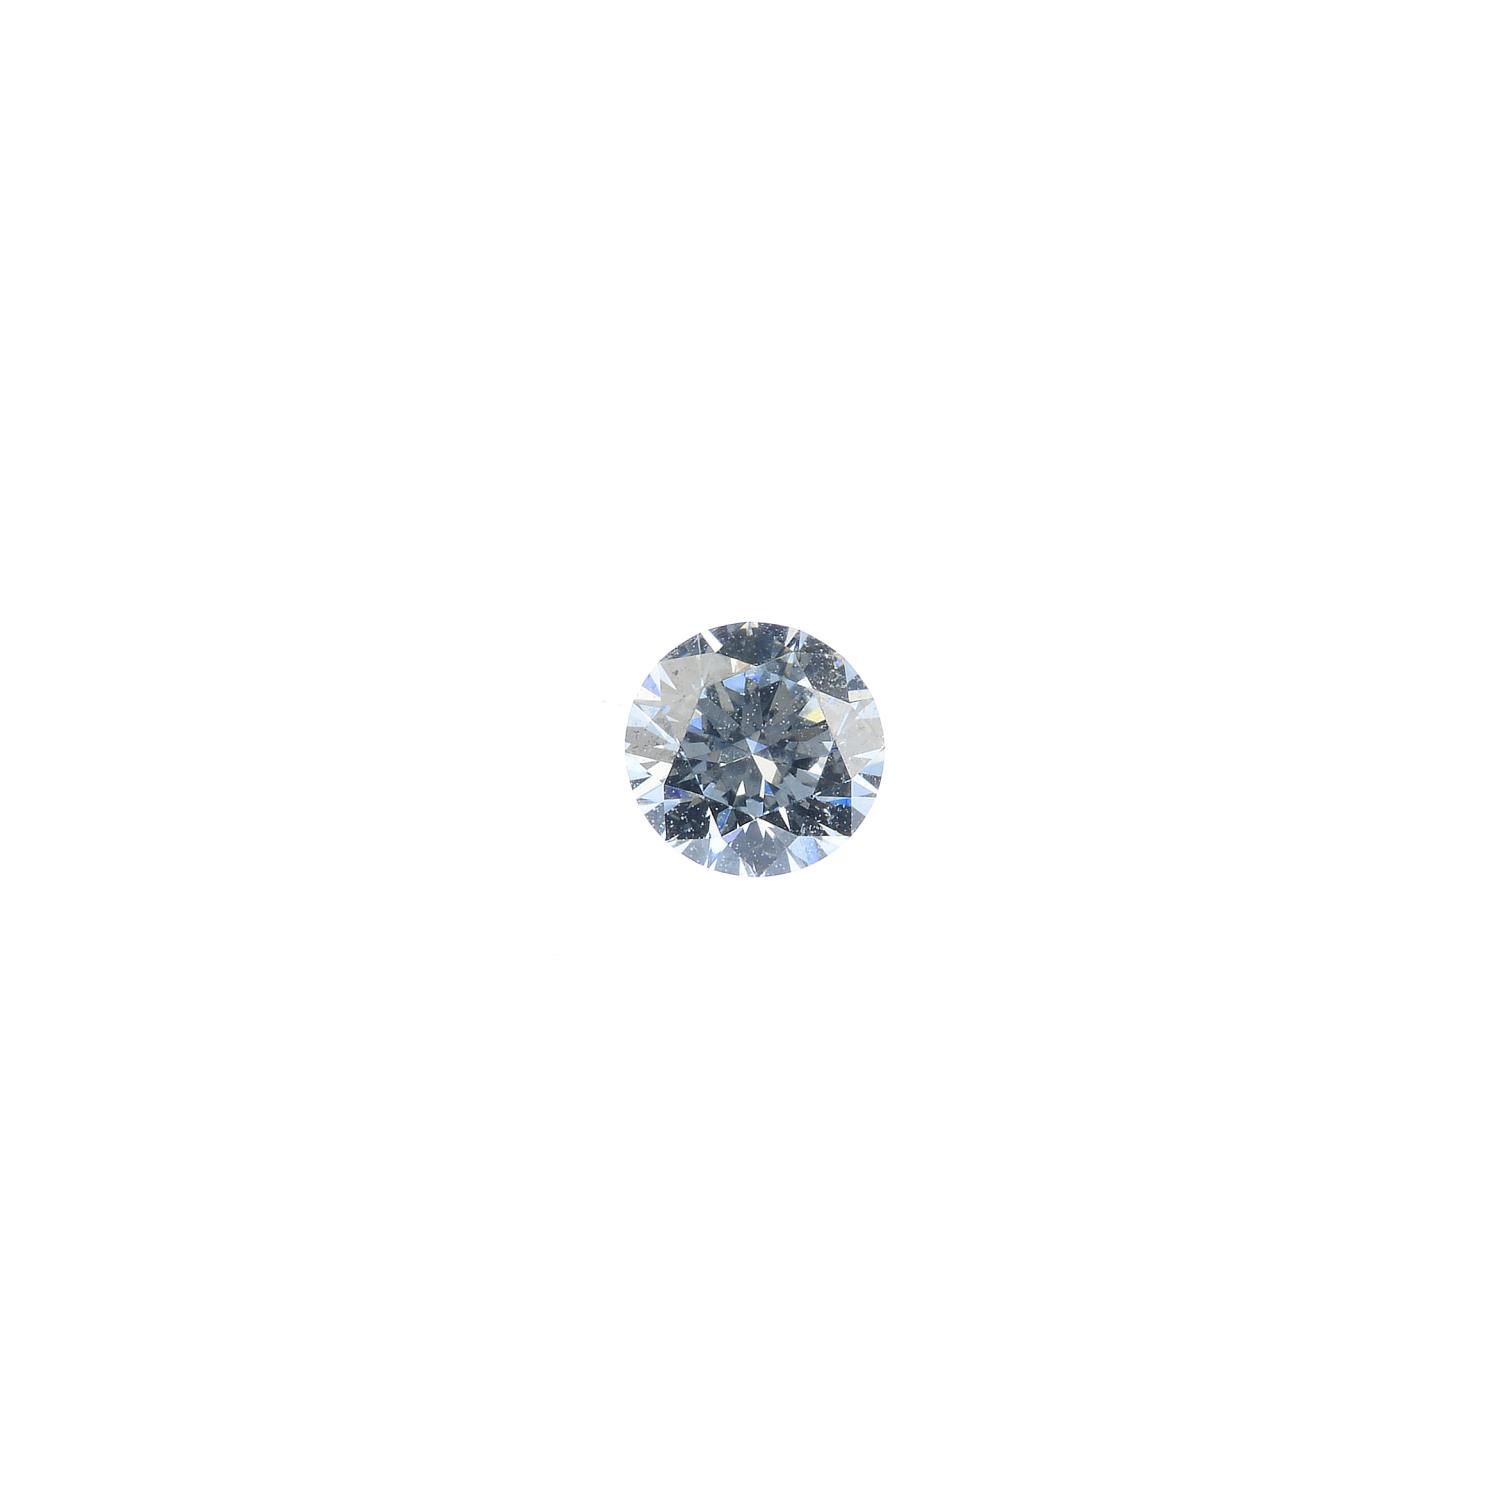 A brilliant-cut coloured diamond, weighing 0.36ct. With report 1139875356, dated 11th April, 2013,